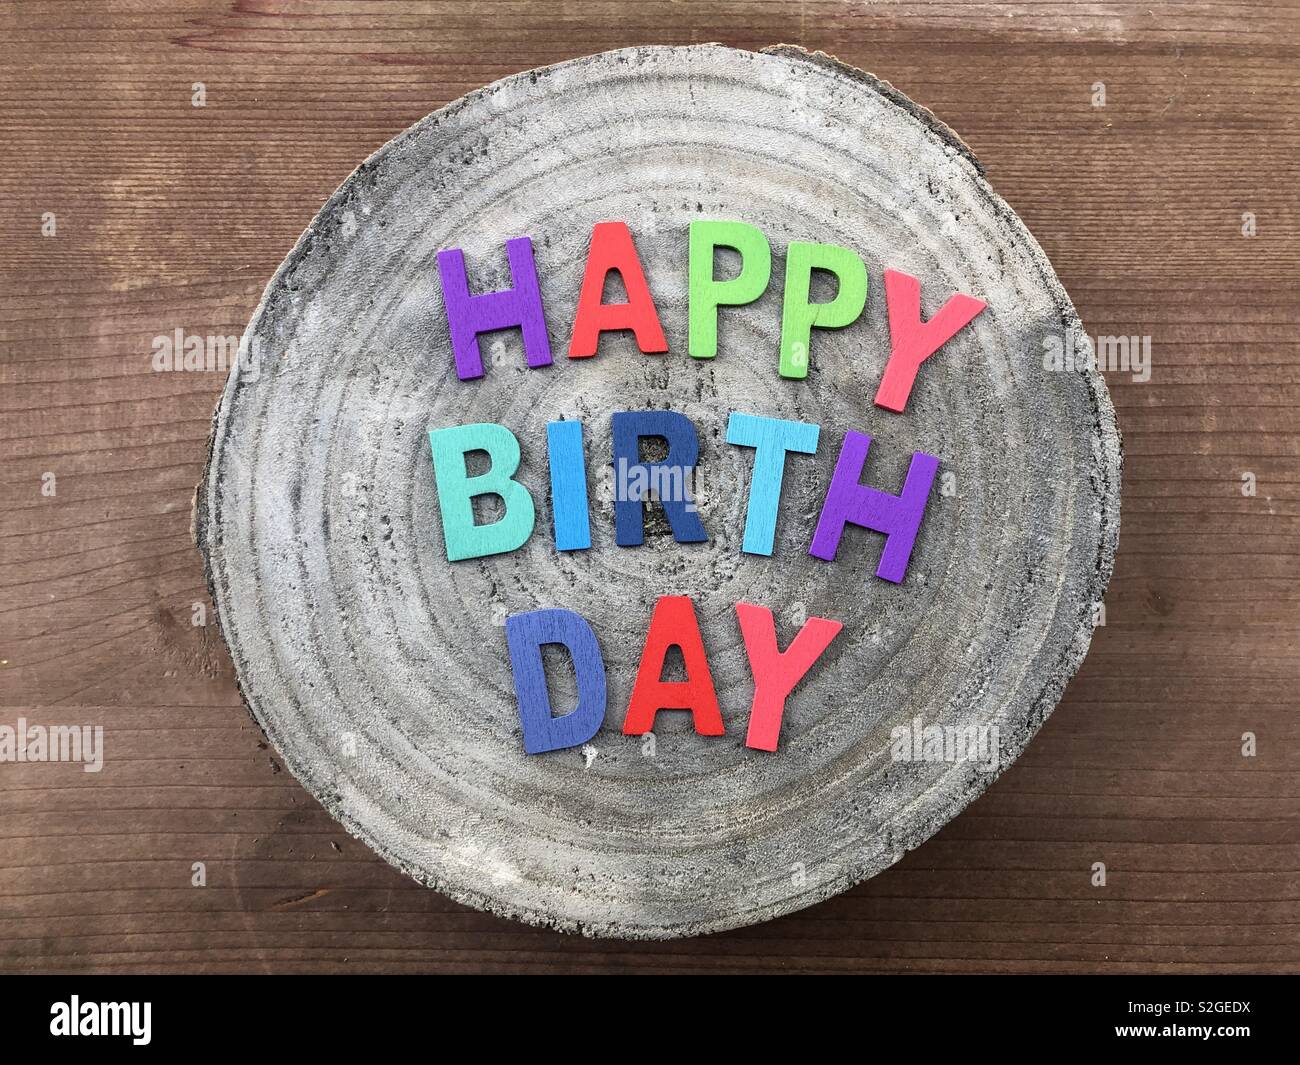 Happy Birthday text with colored wooden letters over a wooden mango round piece Stock Photo